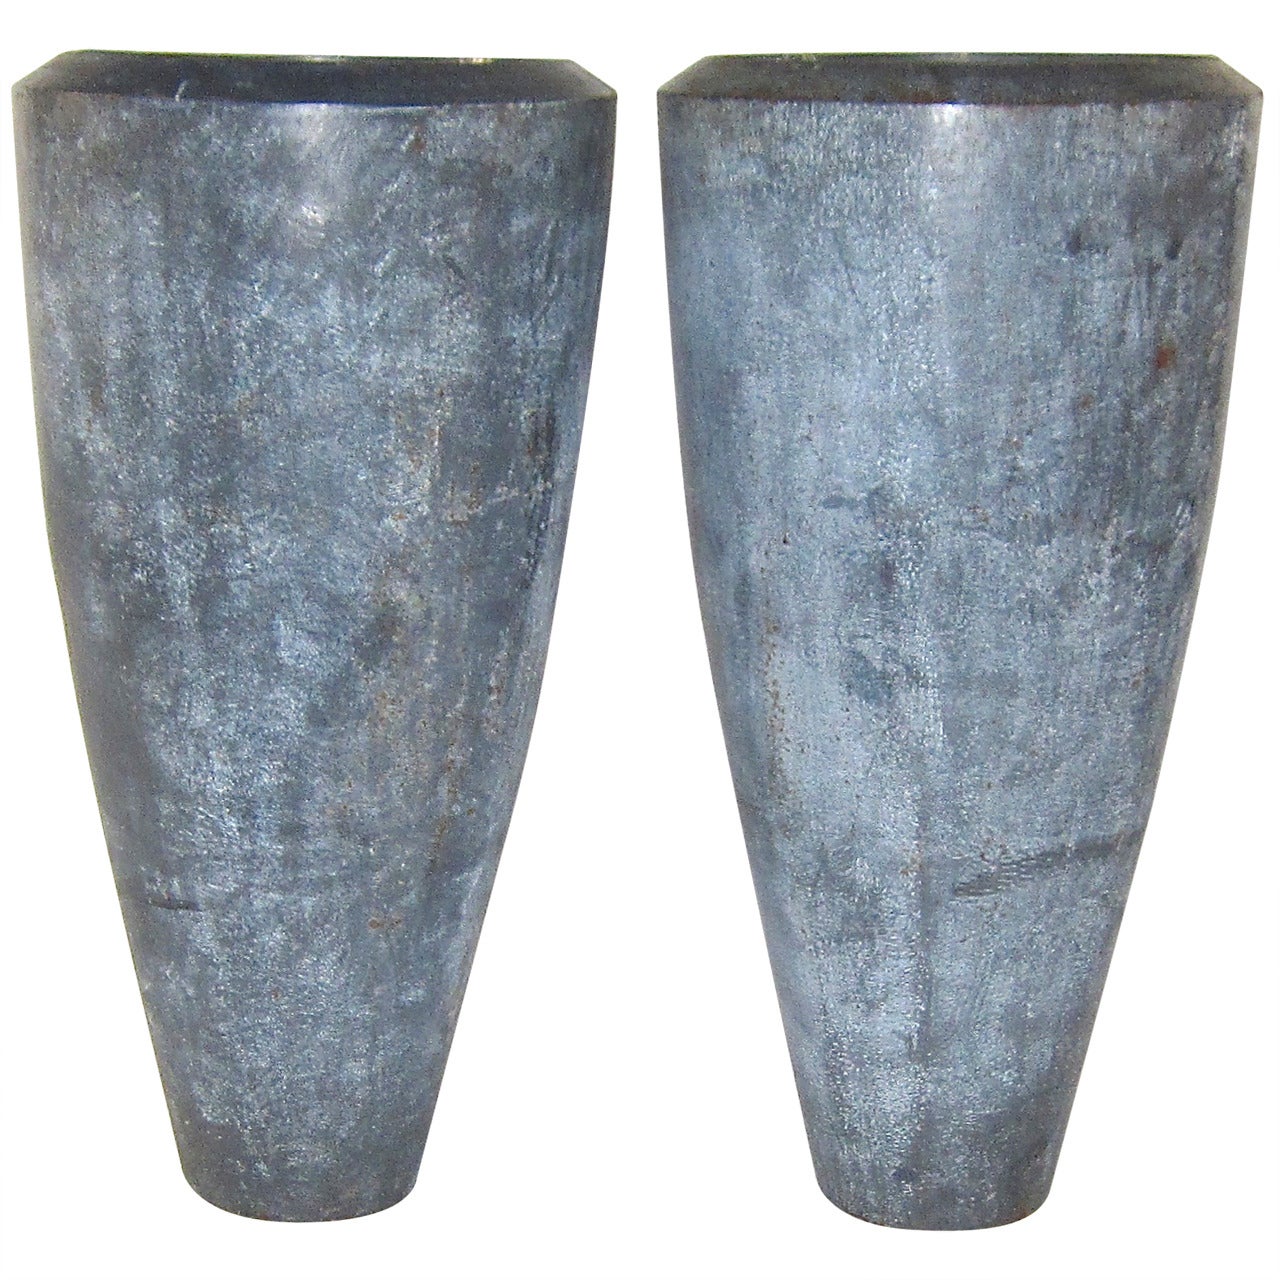 A Pair of Industrial Urns